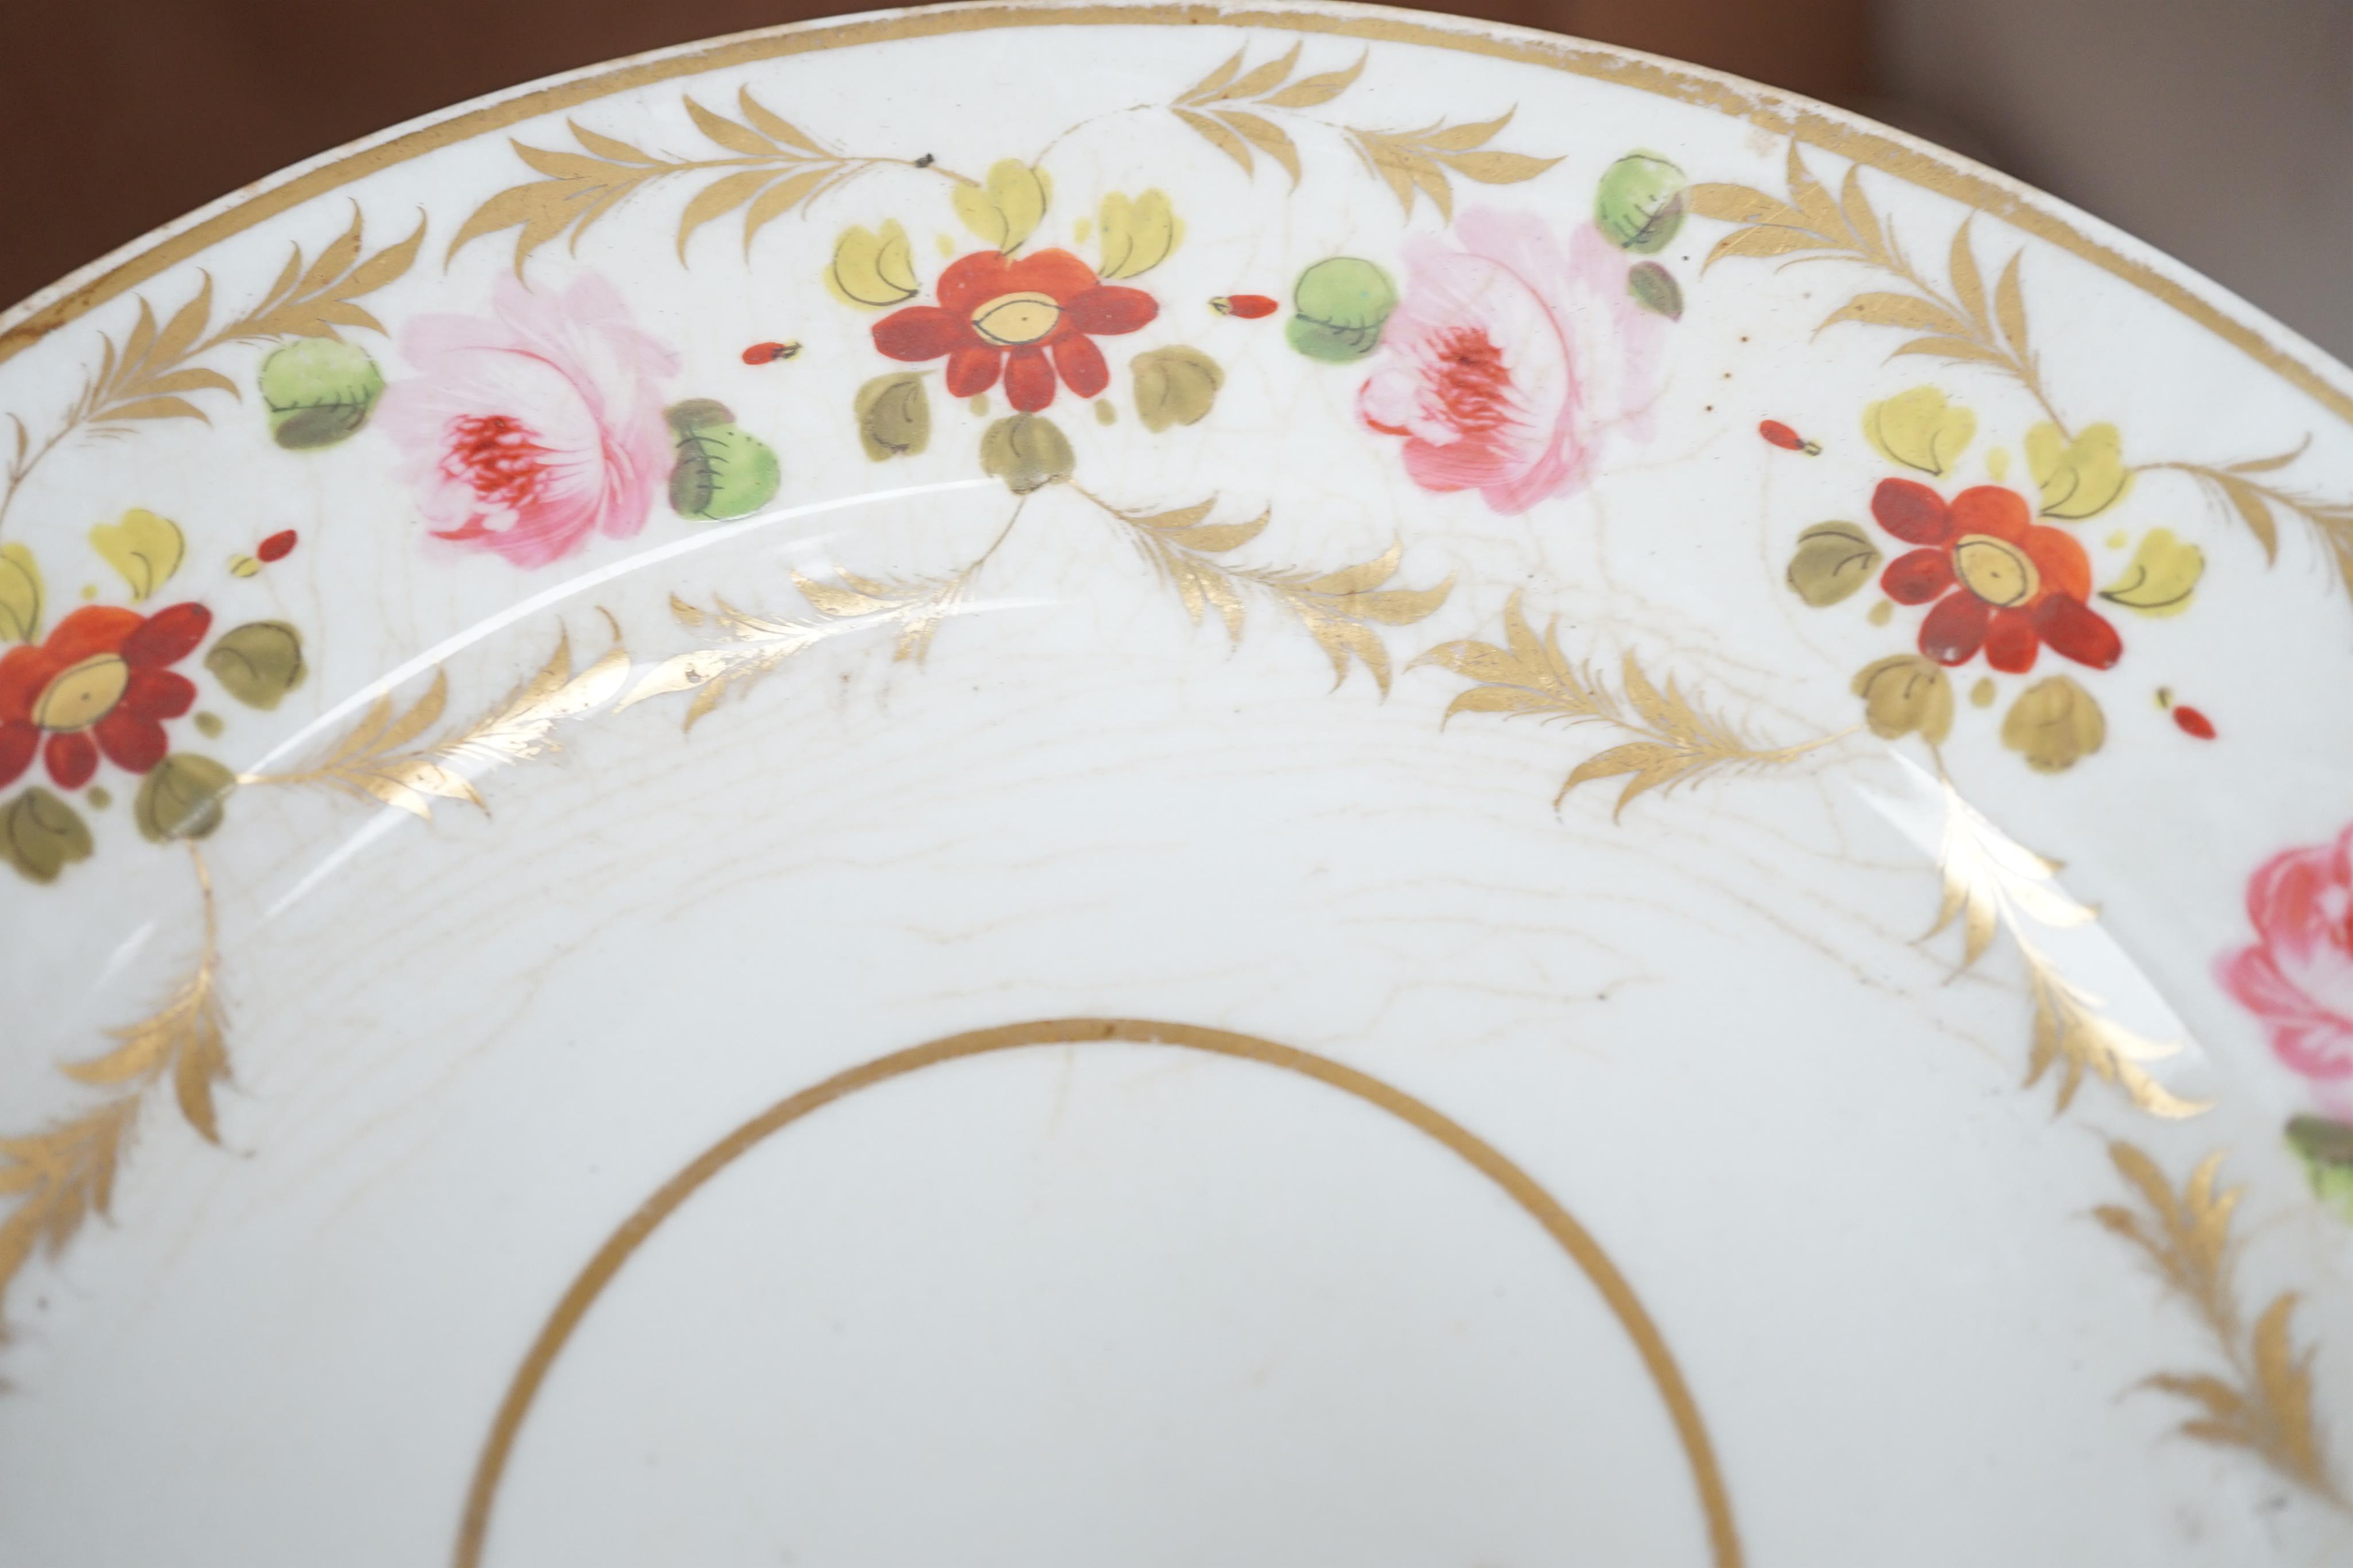 A sixteen piece Derby porcelain part dessert service, the borders painted with roses. Condition - some dishes and plates damaged or stained or crazed.